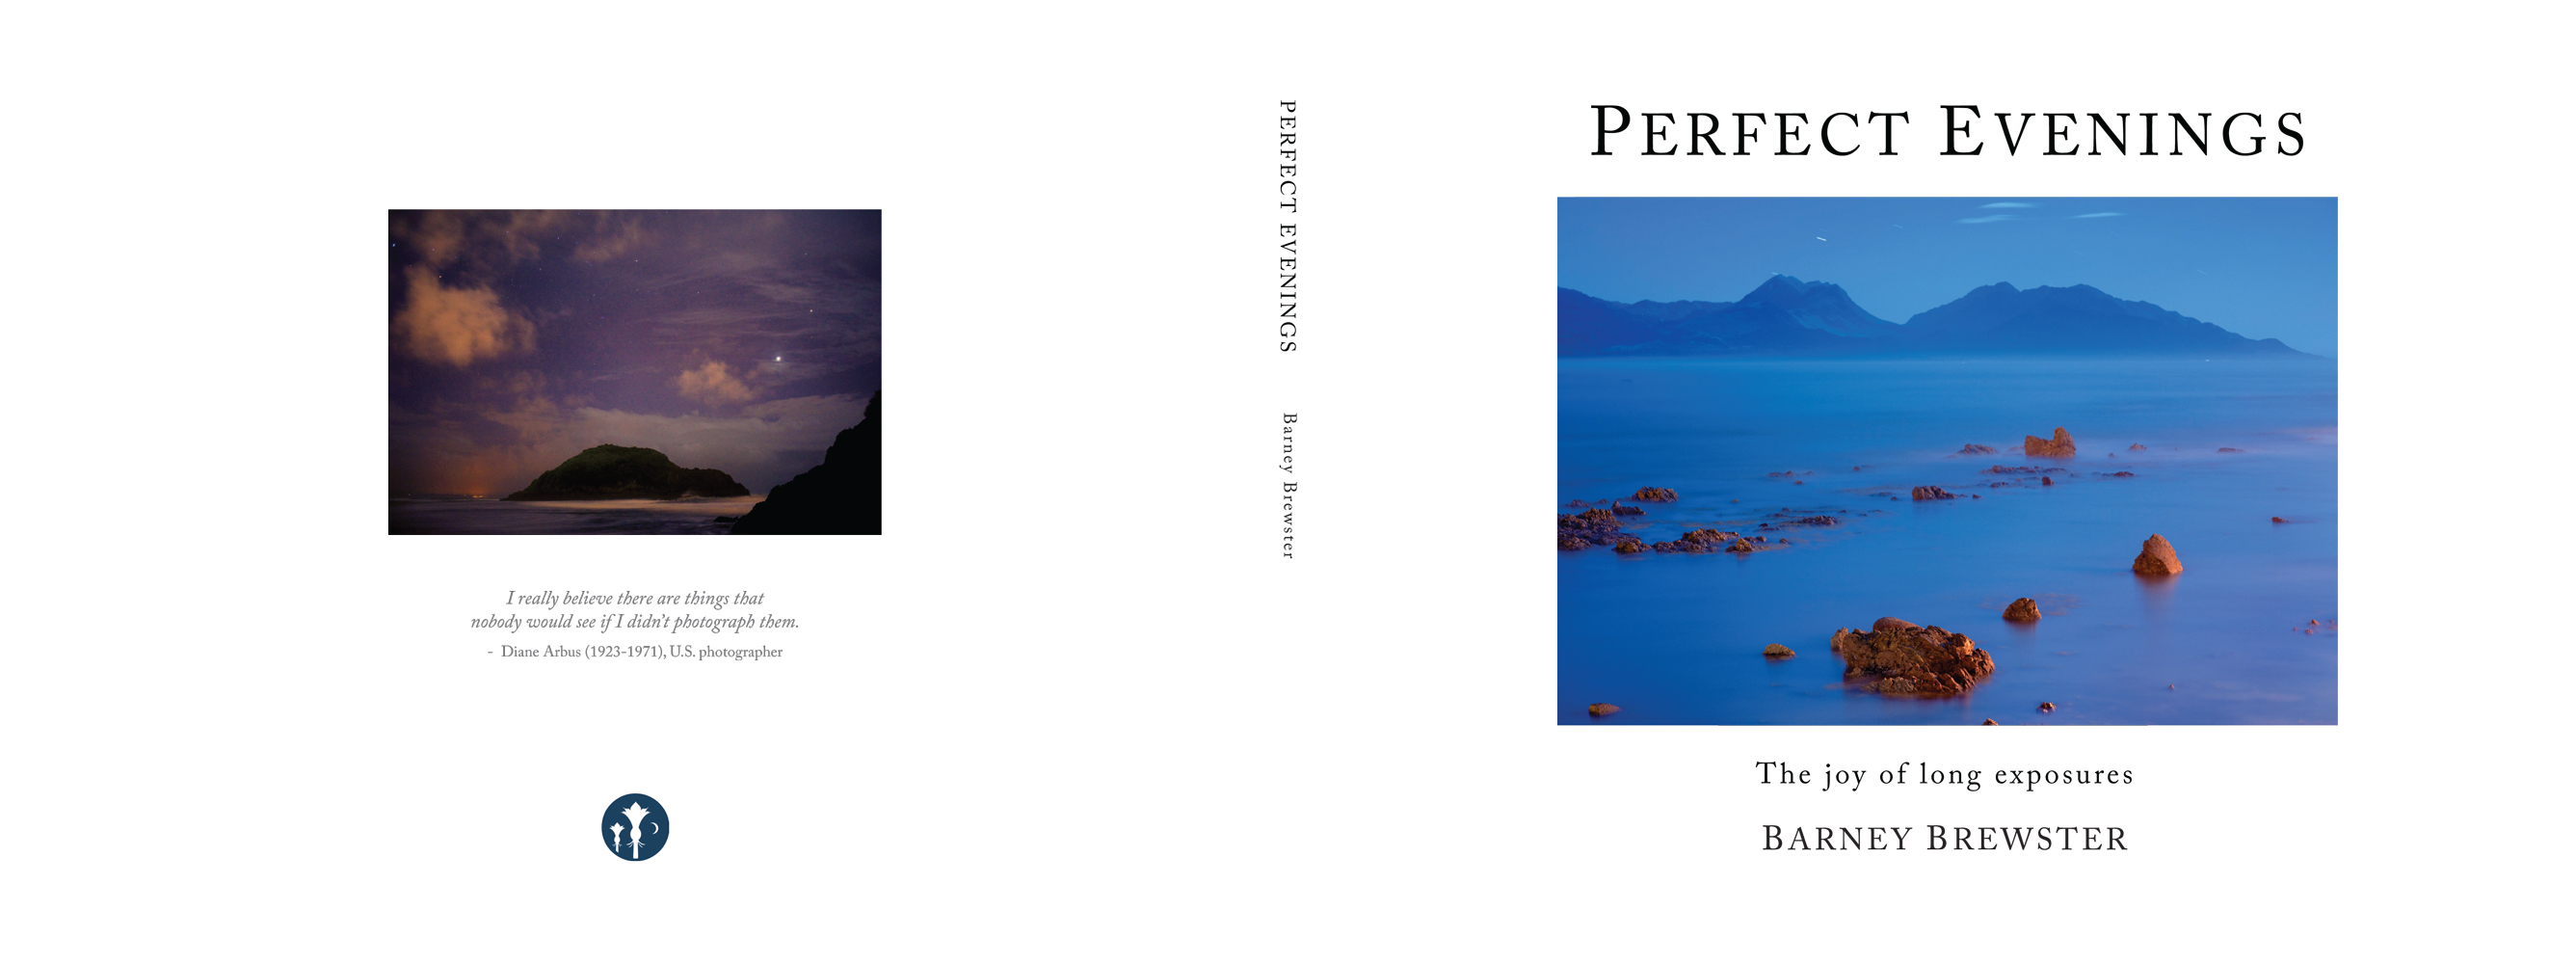 New book coming: Perfect Evenings